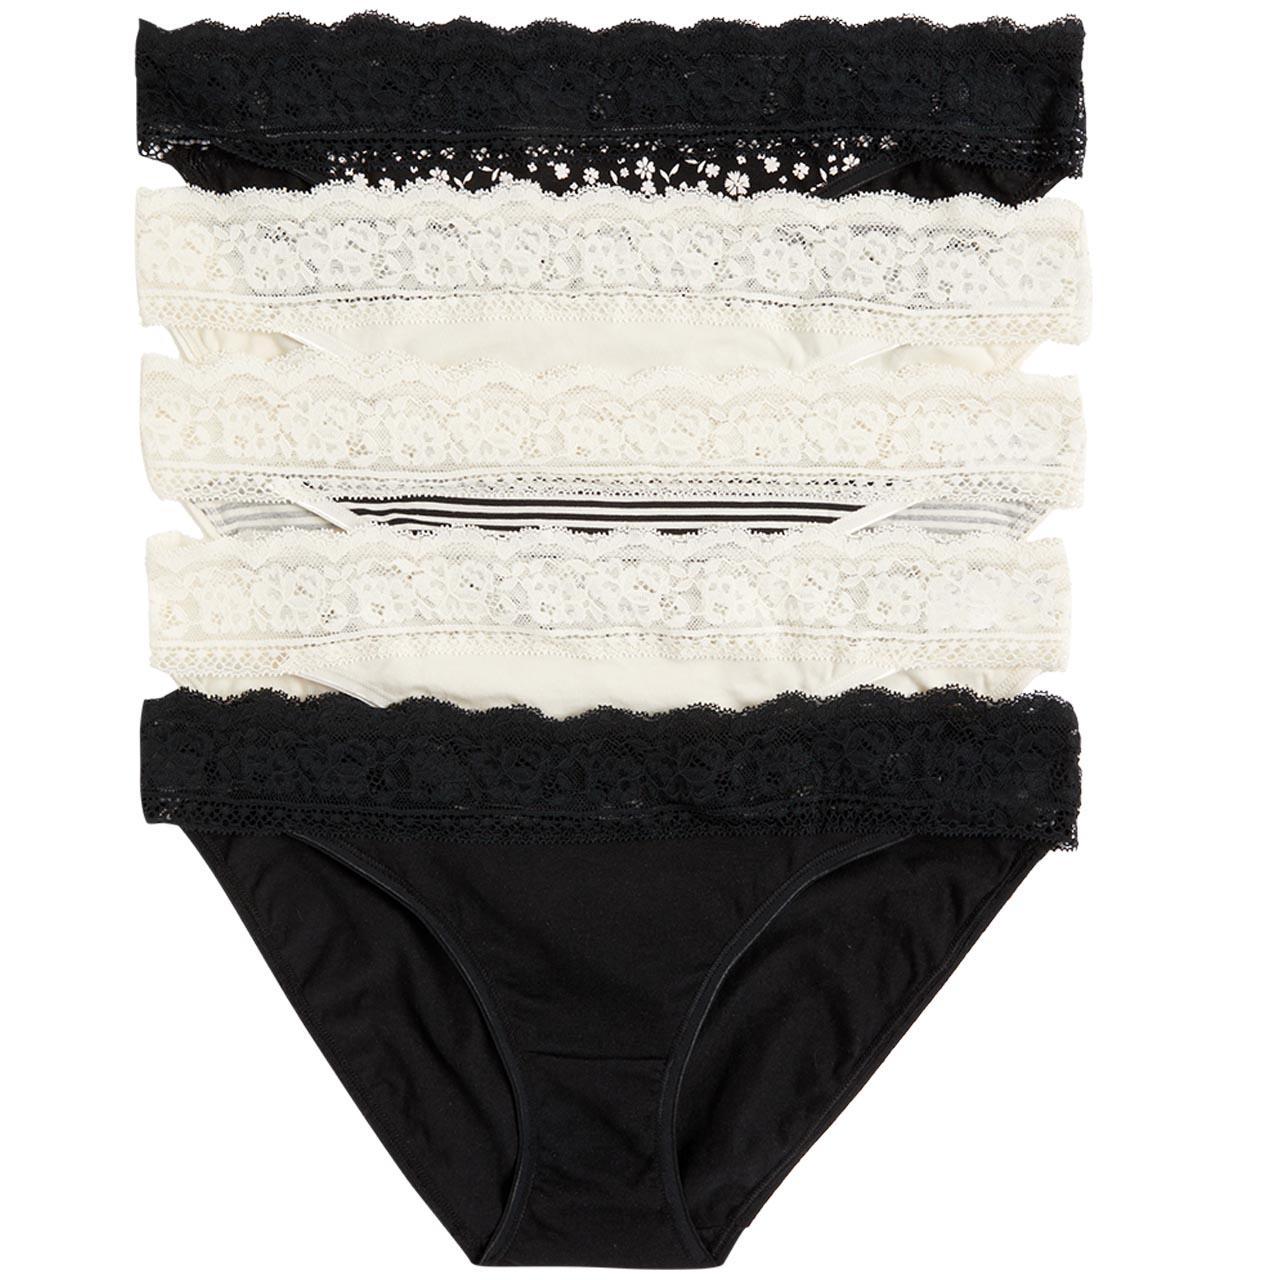 Buy White Full Knickers 5 Pack 8, Knickers